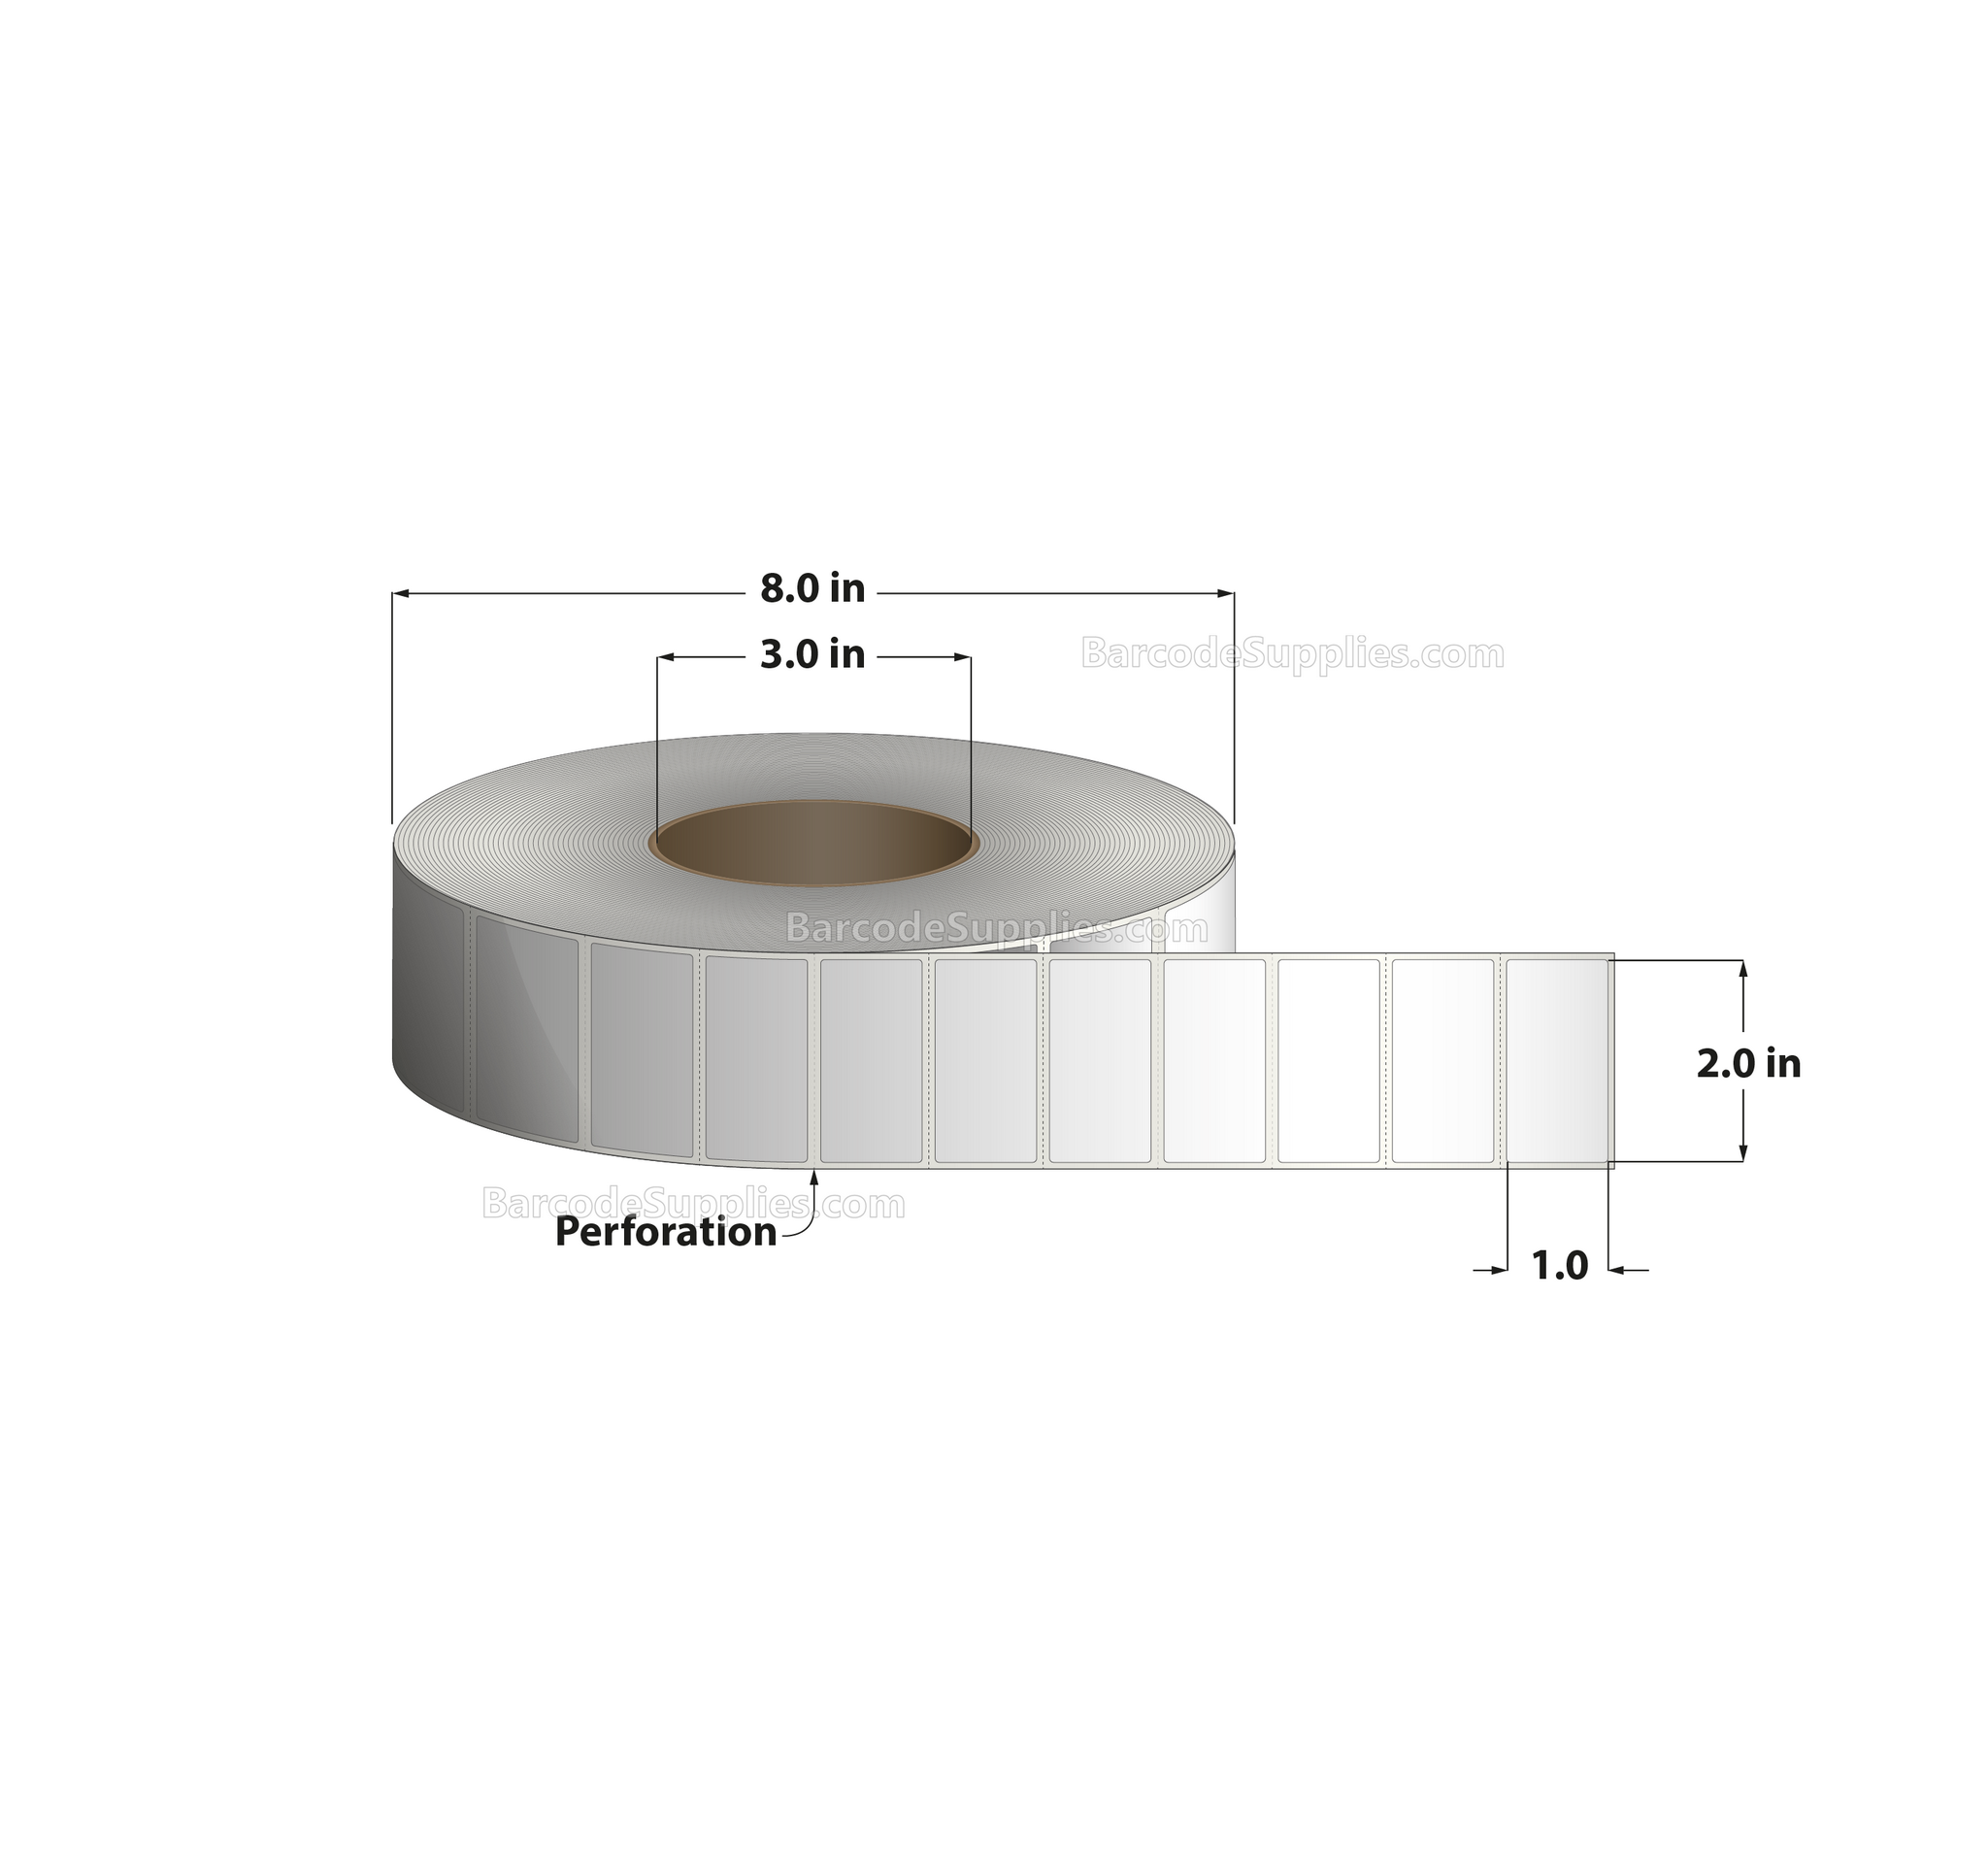 2 x 1 Thermal Transfer White Labels With Permanent Adhesive - Perforated - 5500 Labels Per Roll - Carton Of 8 Rolls - 44000 Labels Total - MPN: RT-2-1-5500-3